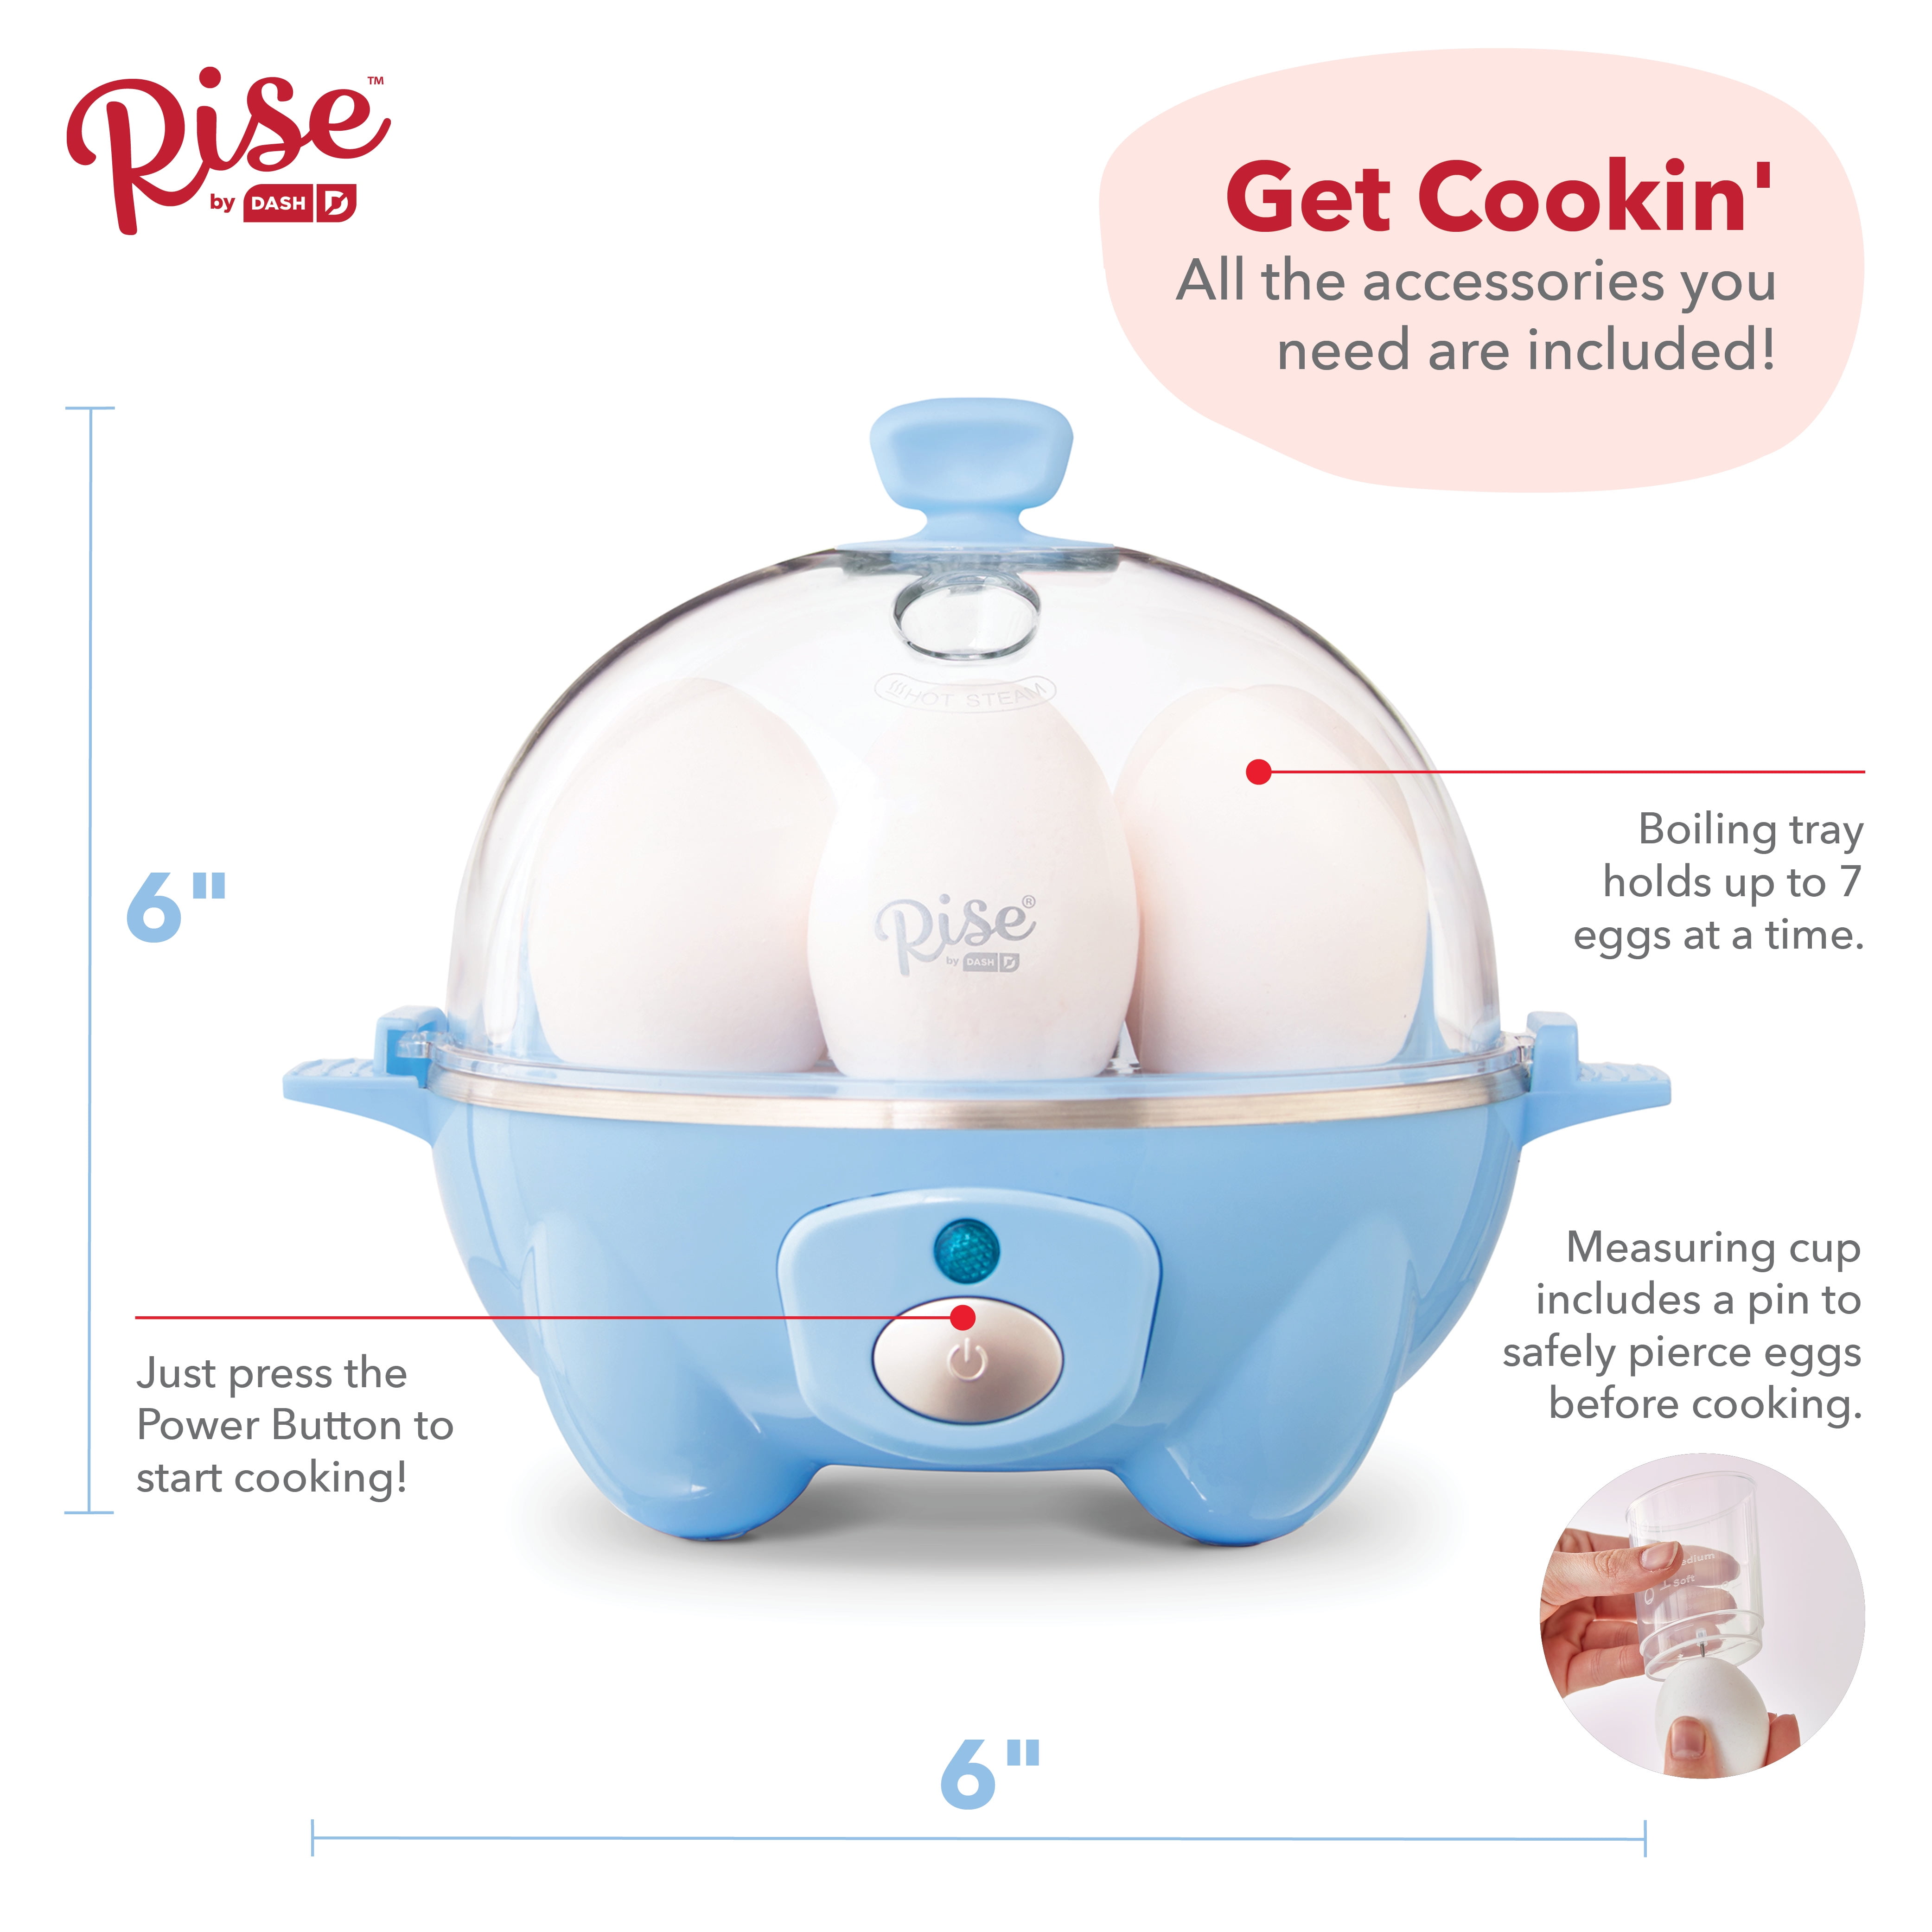 Save 33% on Dash Egg Cookers during  Prime Day